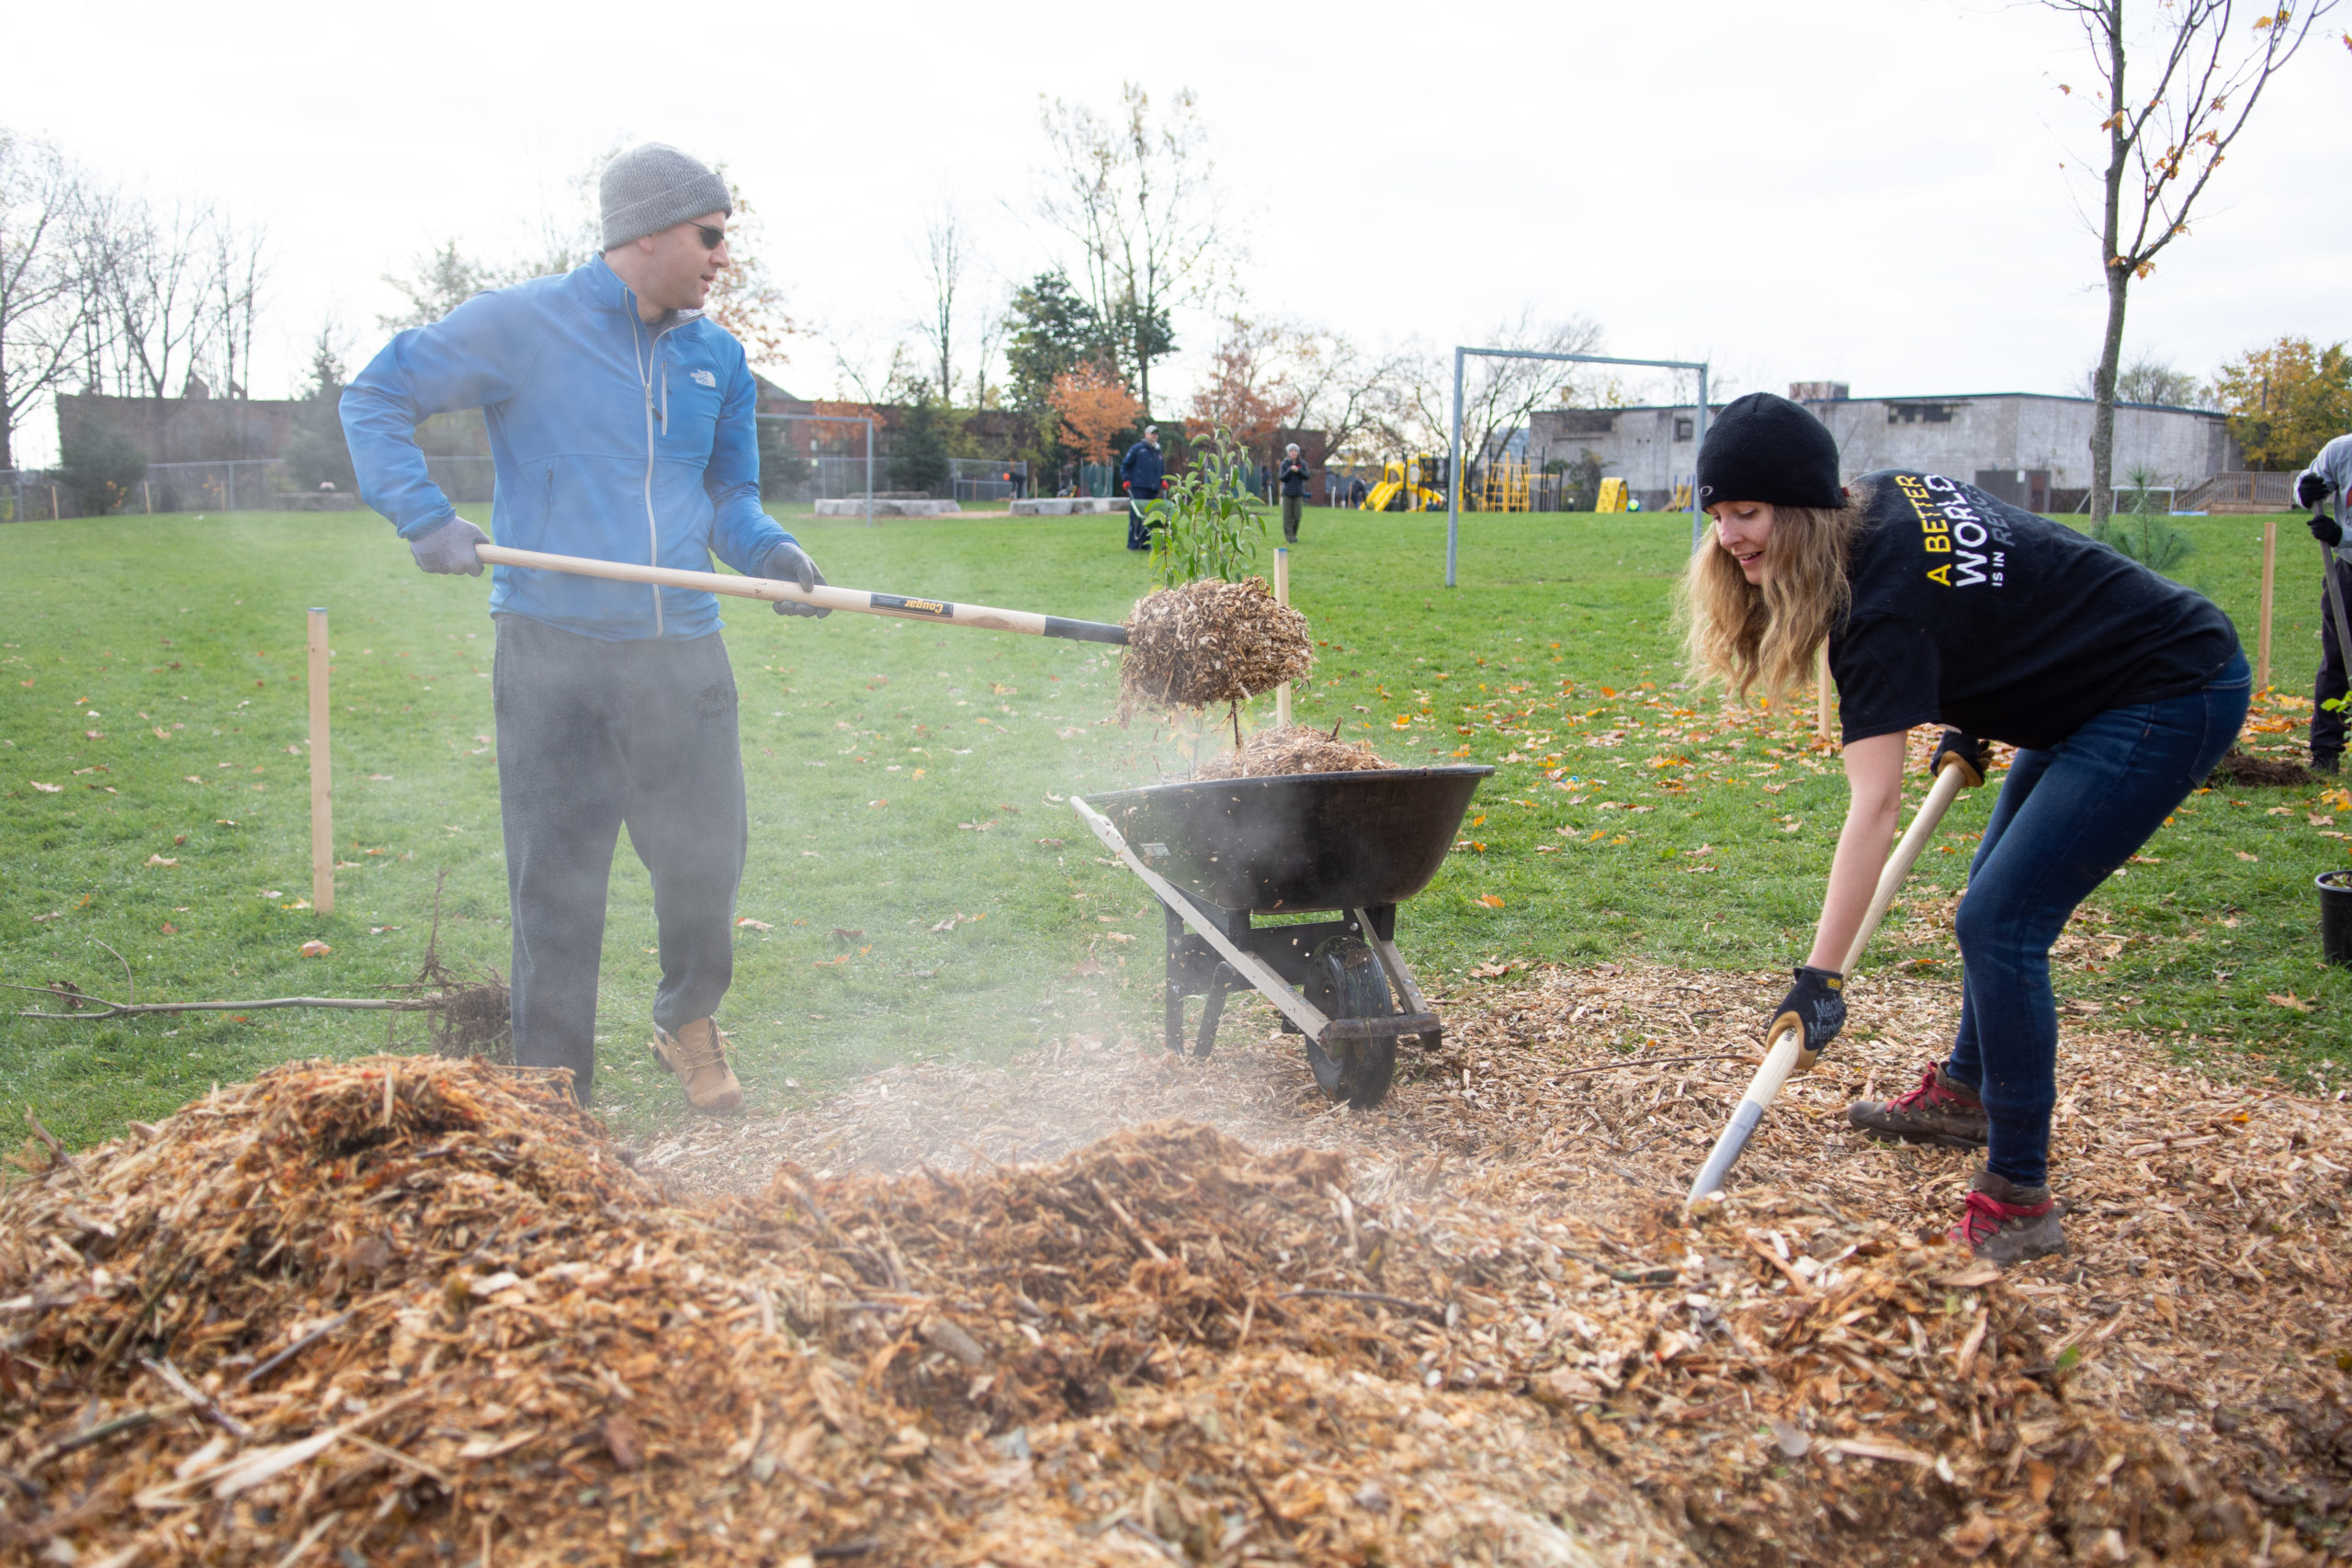 Two volunteers work together to load up a wheelbarrow with fresh, steaming mulch.